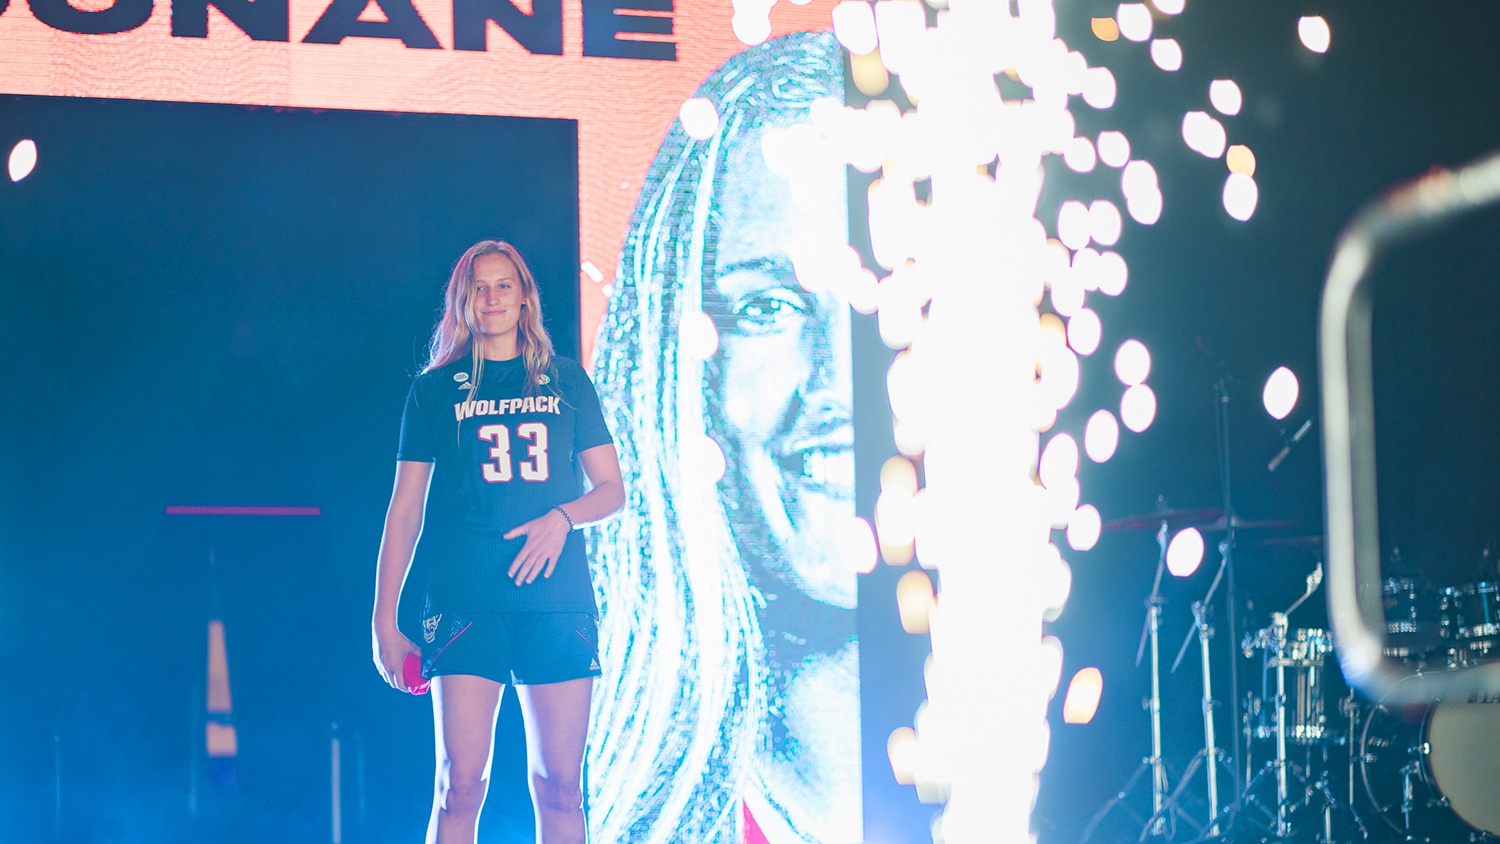 A women's basketball team player stands in front of a crowd.  